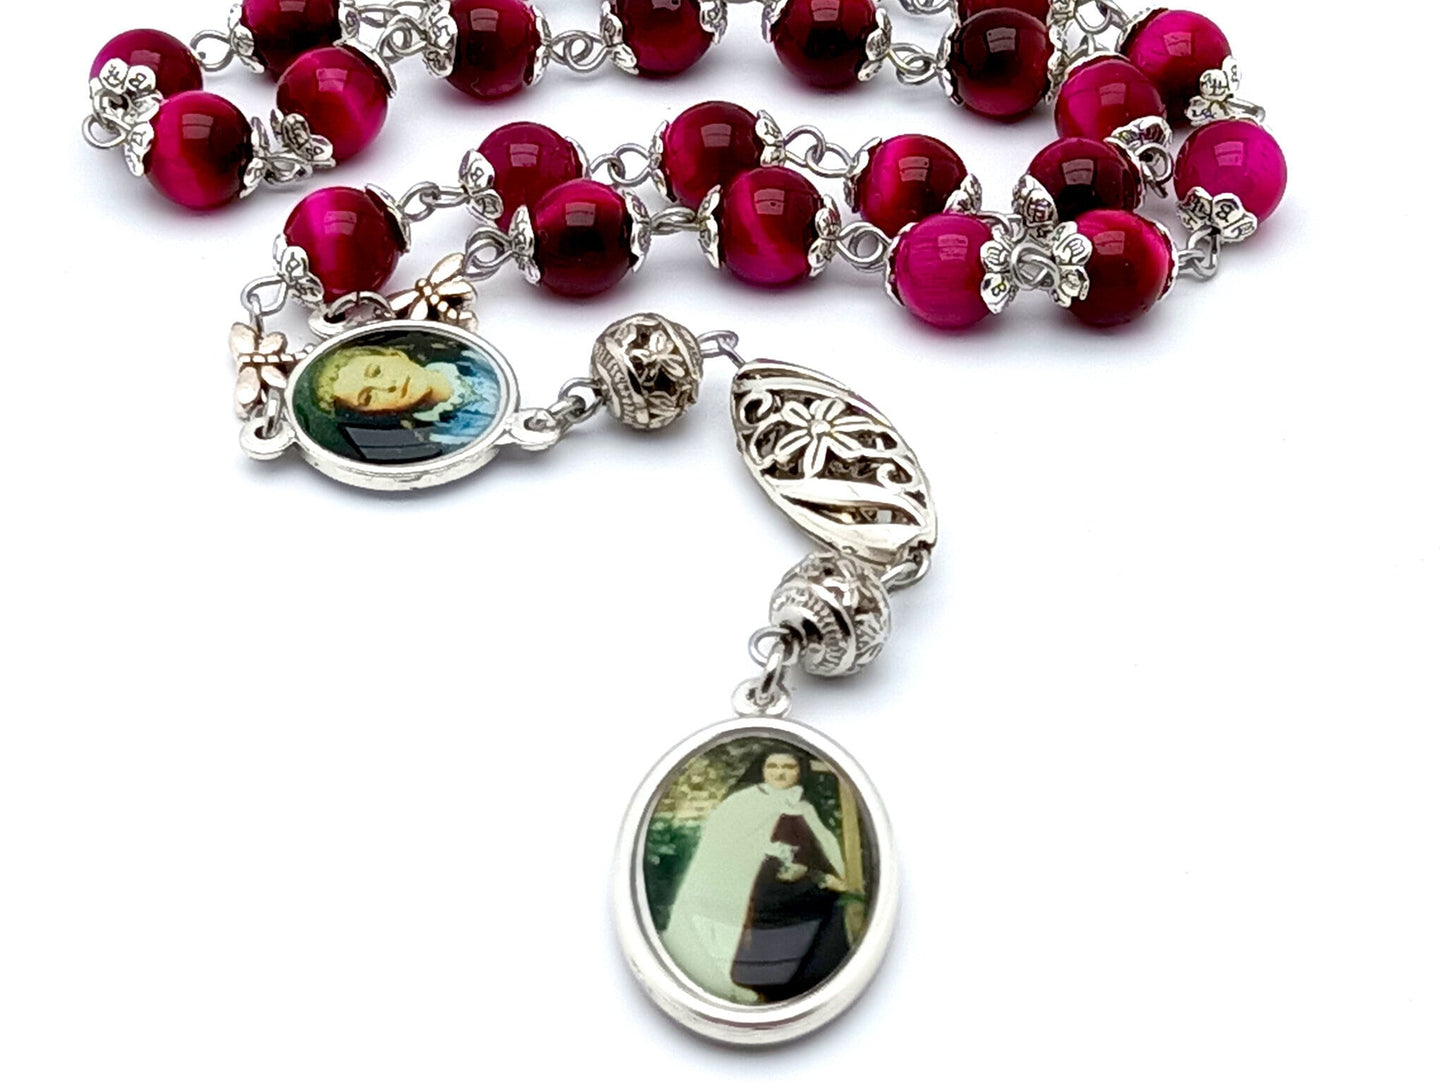 Saint Therese of Lisieux unique rosary beads prayer chaplet with pink tigers eye gemstone and silver beads, picture end and centre medals.